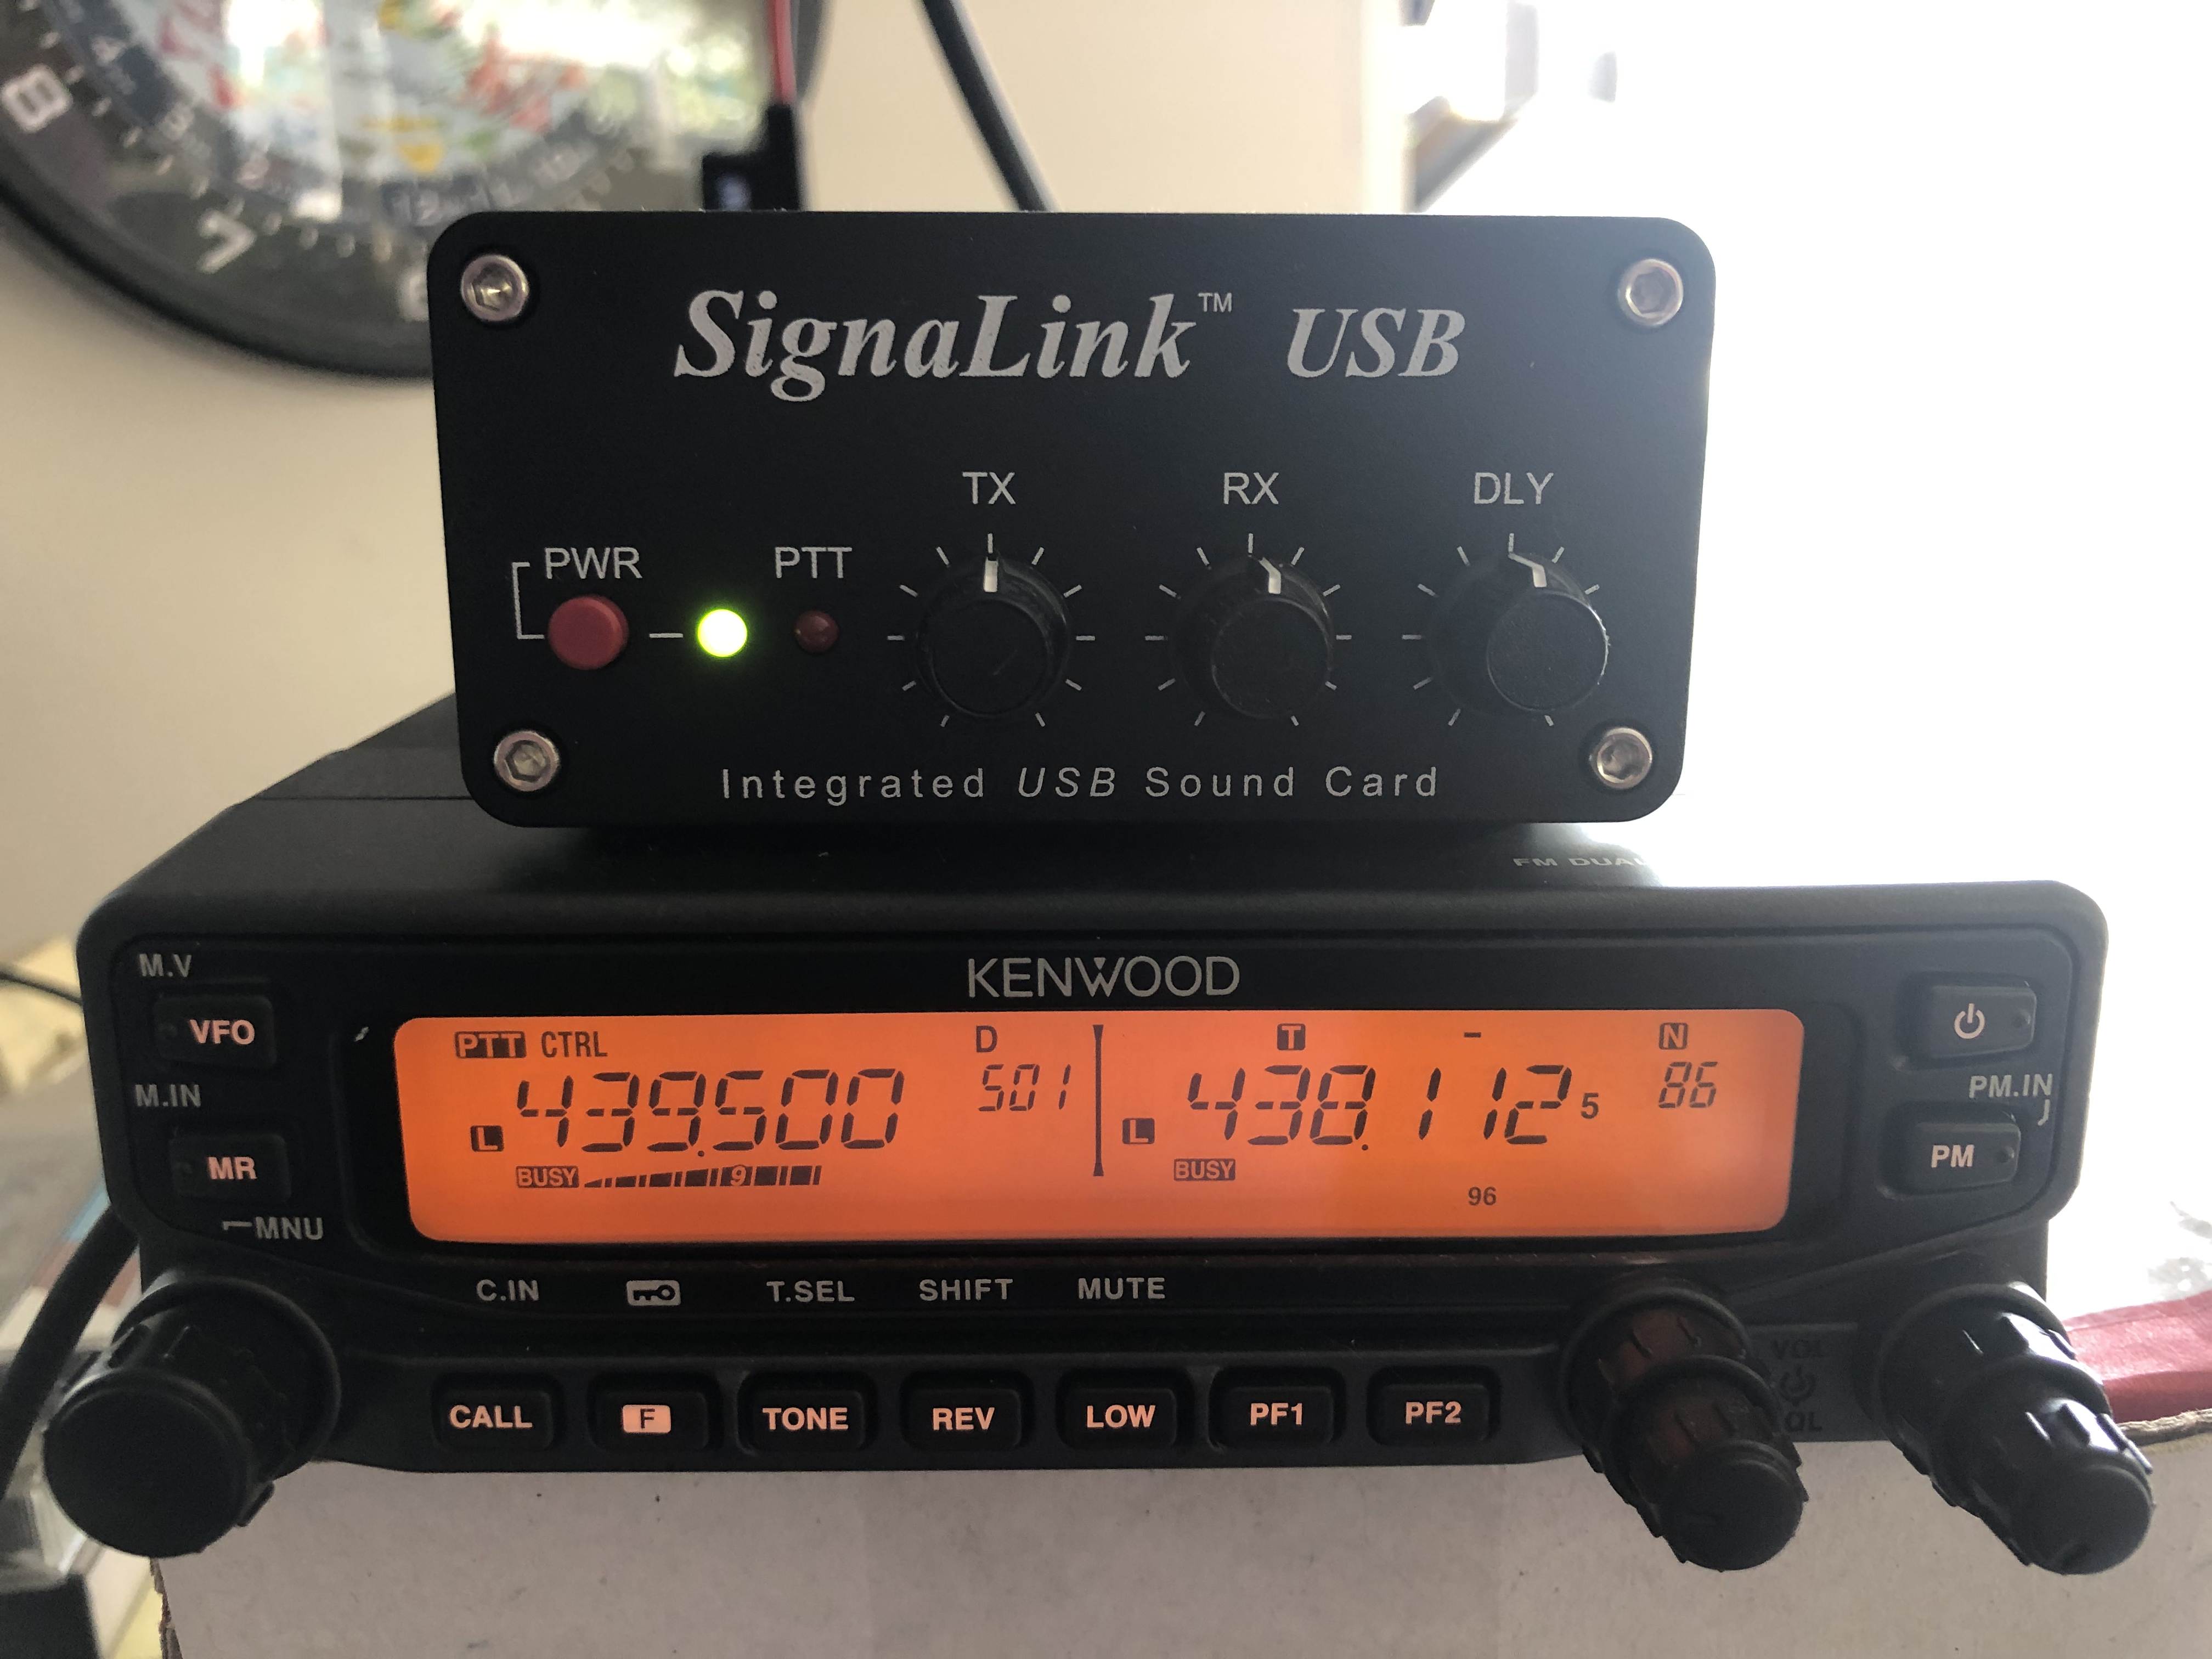 Kenwood TM-V71A connected to a SignaLink